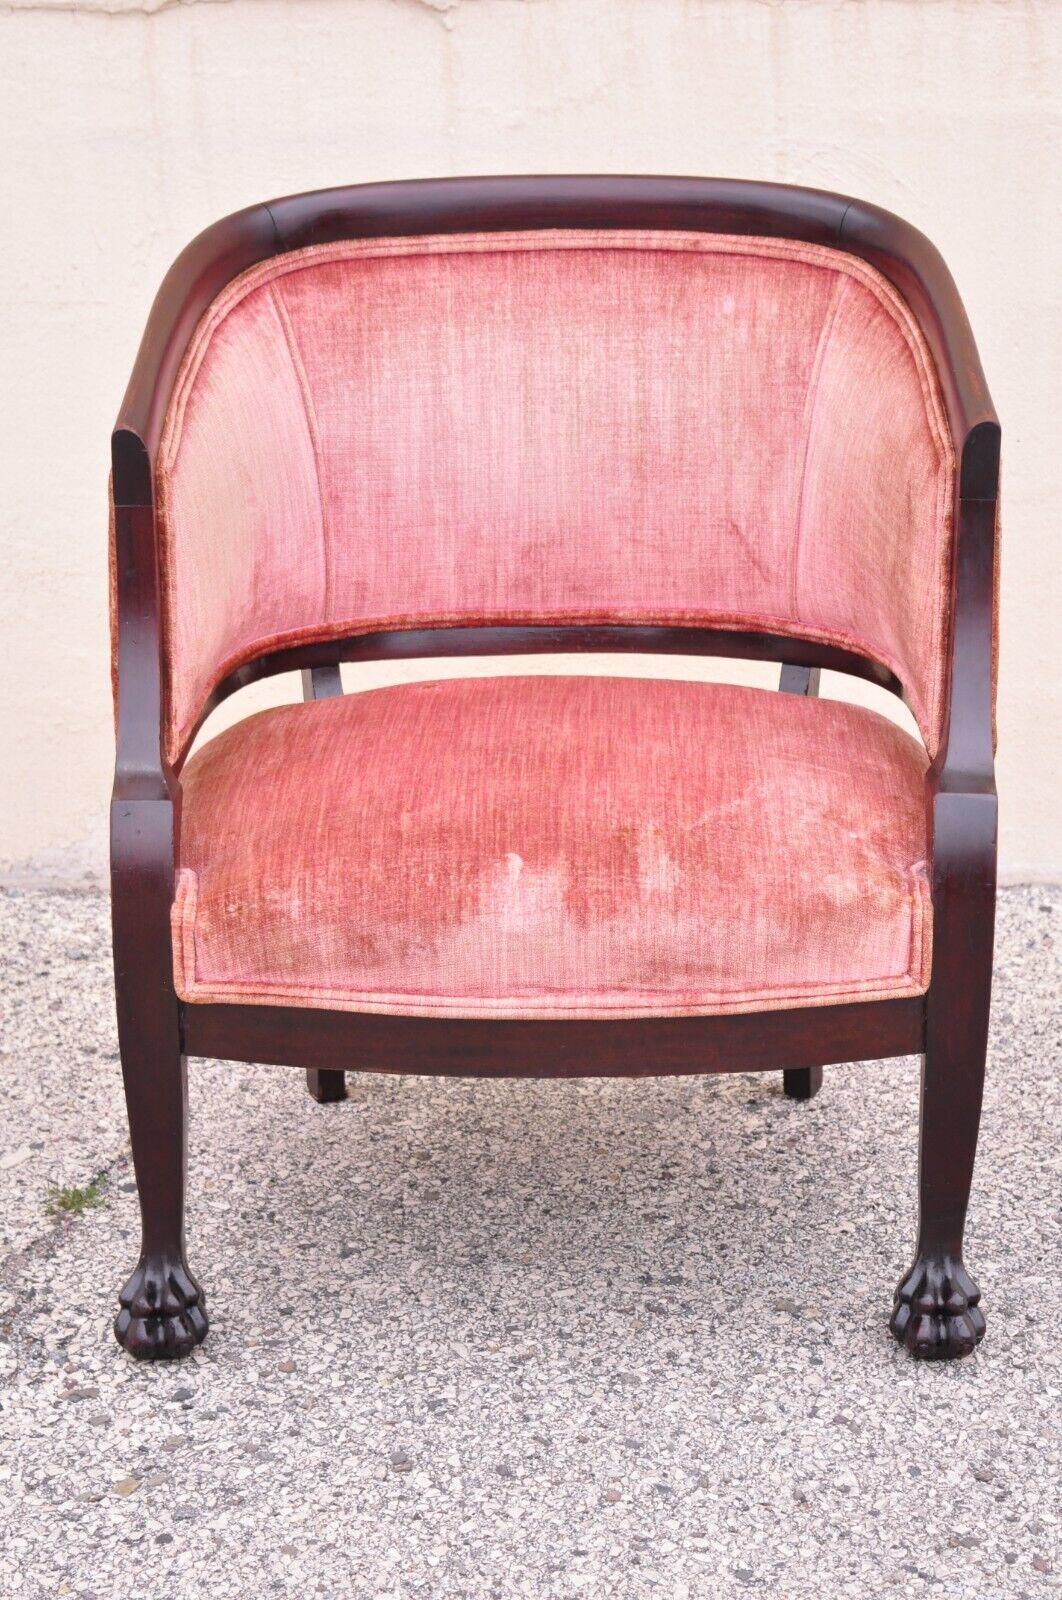  Antique French Empire Mahogany Carved Paw Feet Pink Parlor Arm Chair.
Item features carved paw feet, barrel back, pink upholstery, solid mahogany wood construction, very nice antique item, great style and form. Circa Early 1900s. Measurements: 32